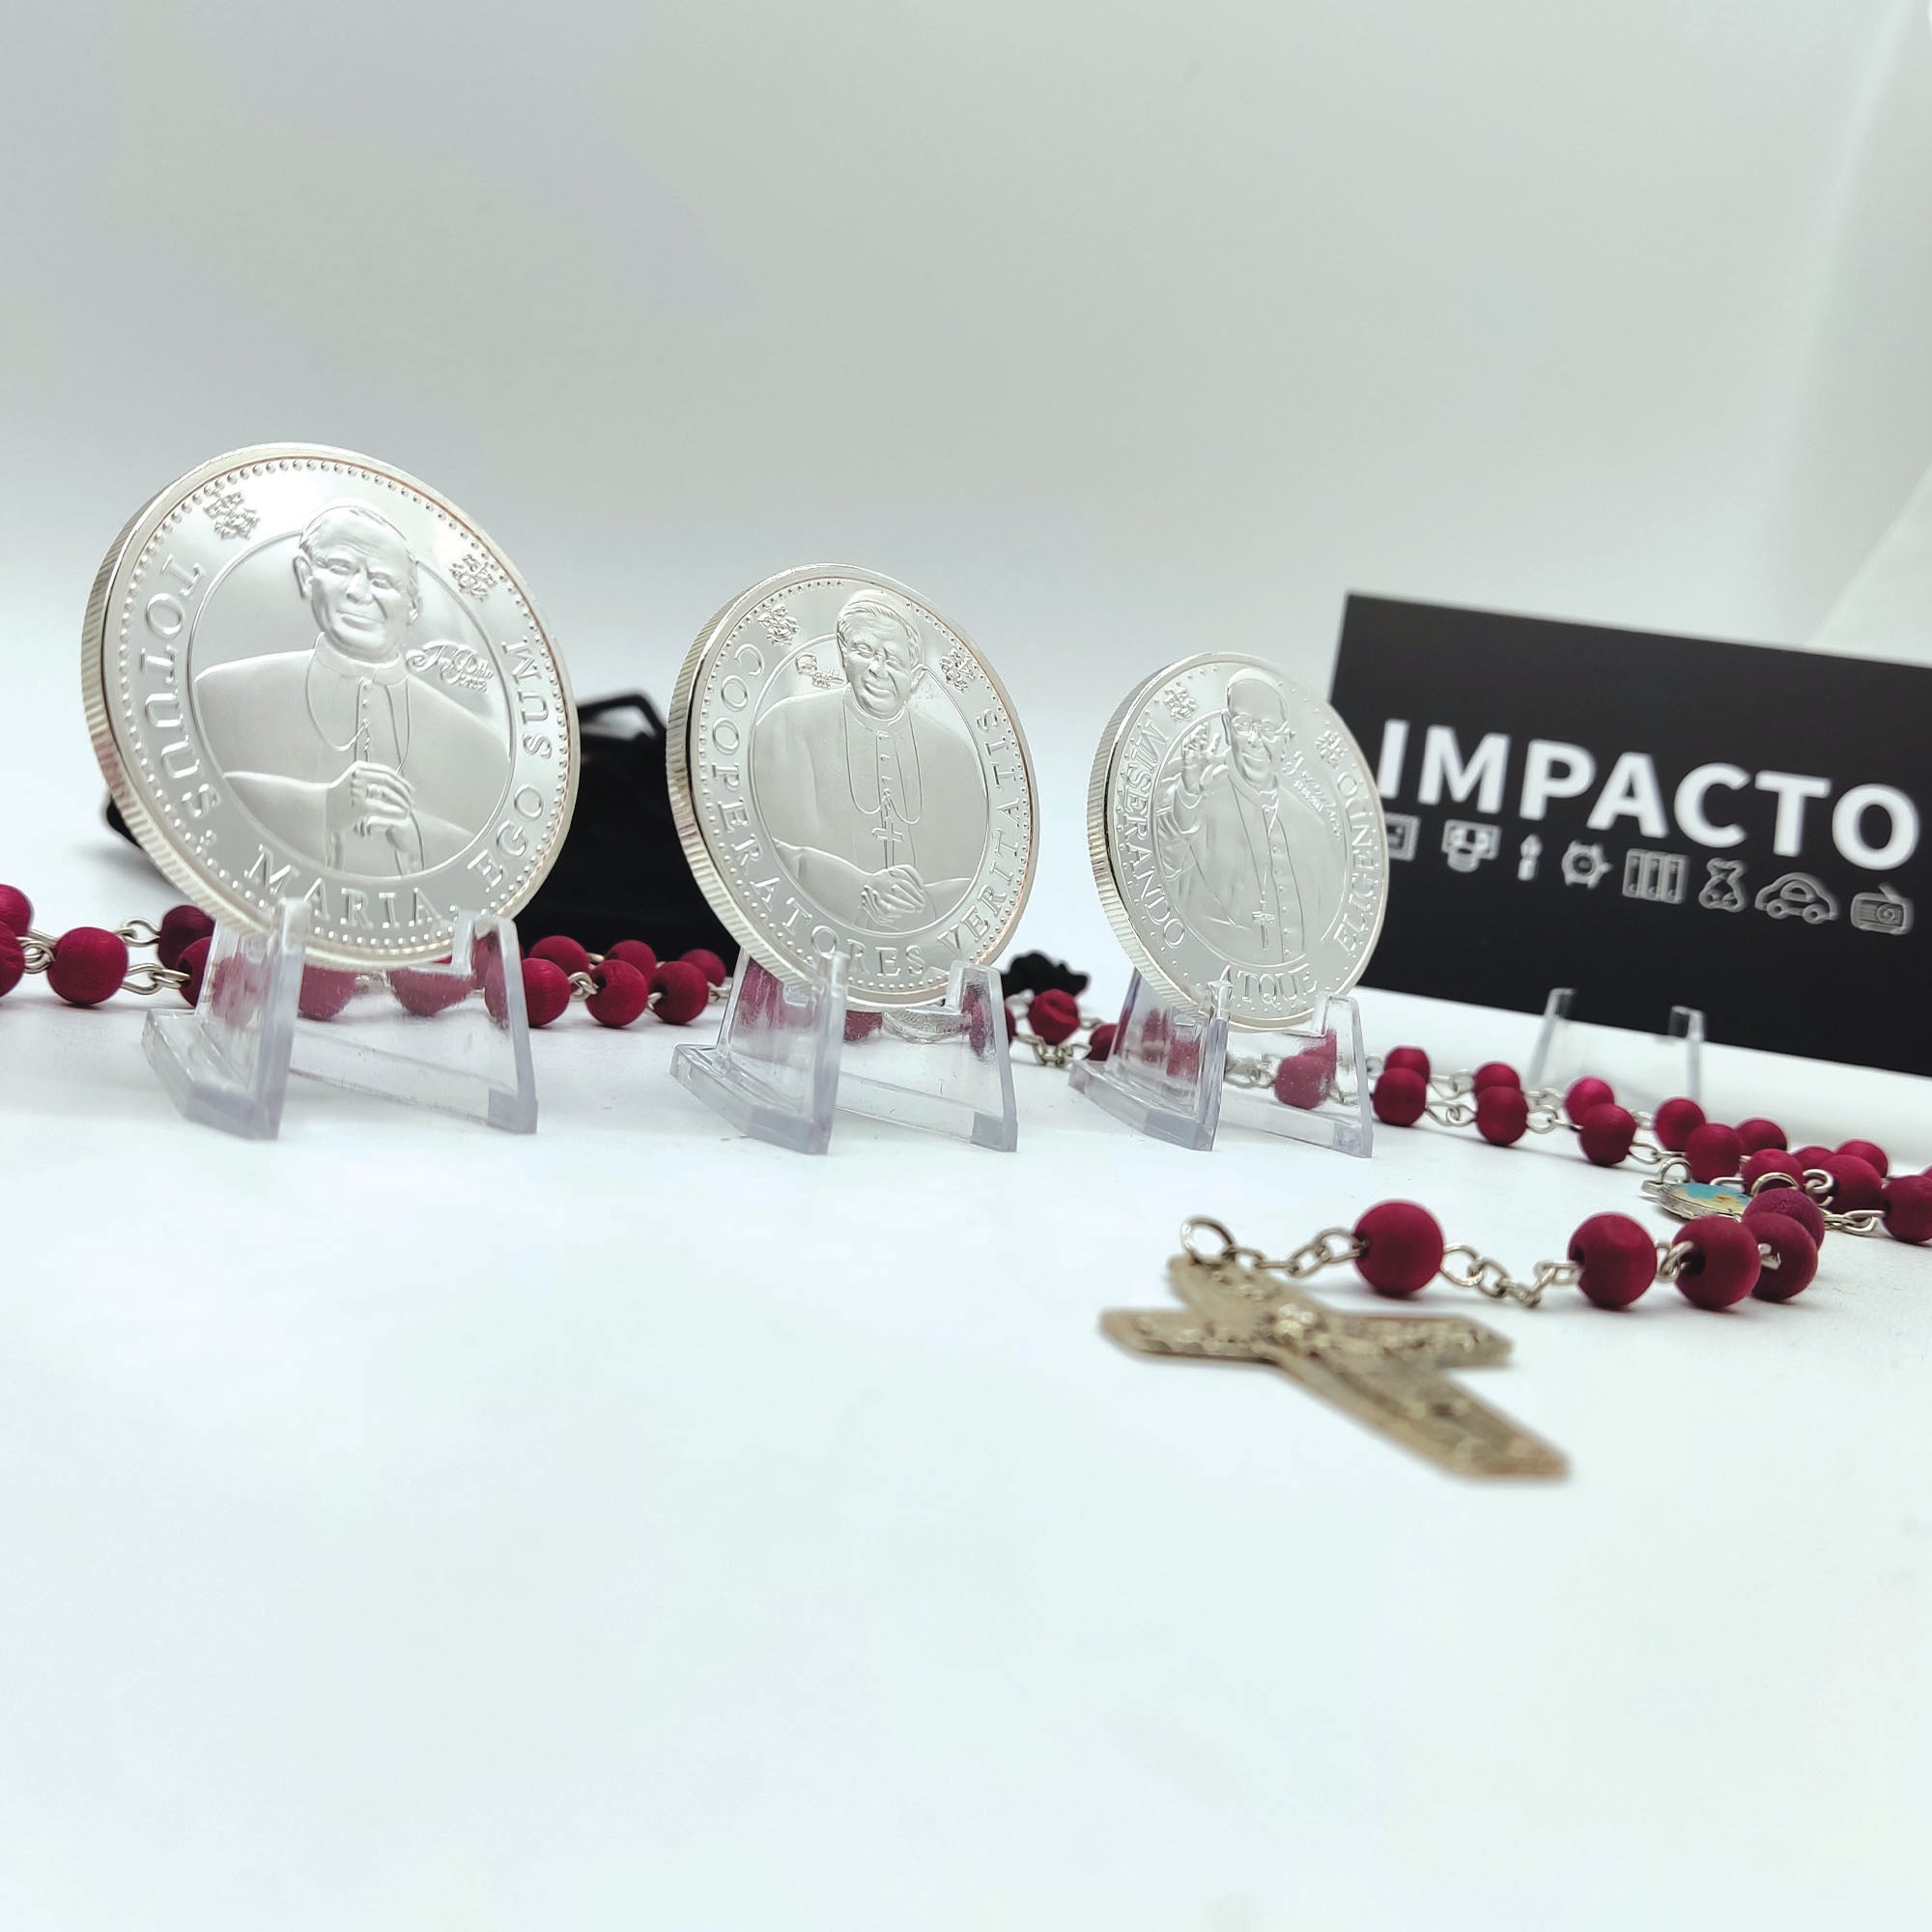 3 silver plated commemorative medals and rose scented rosary as a gift.